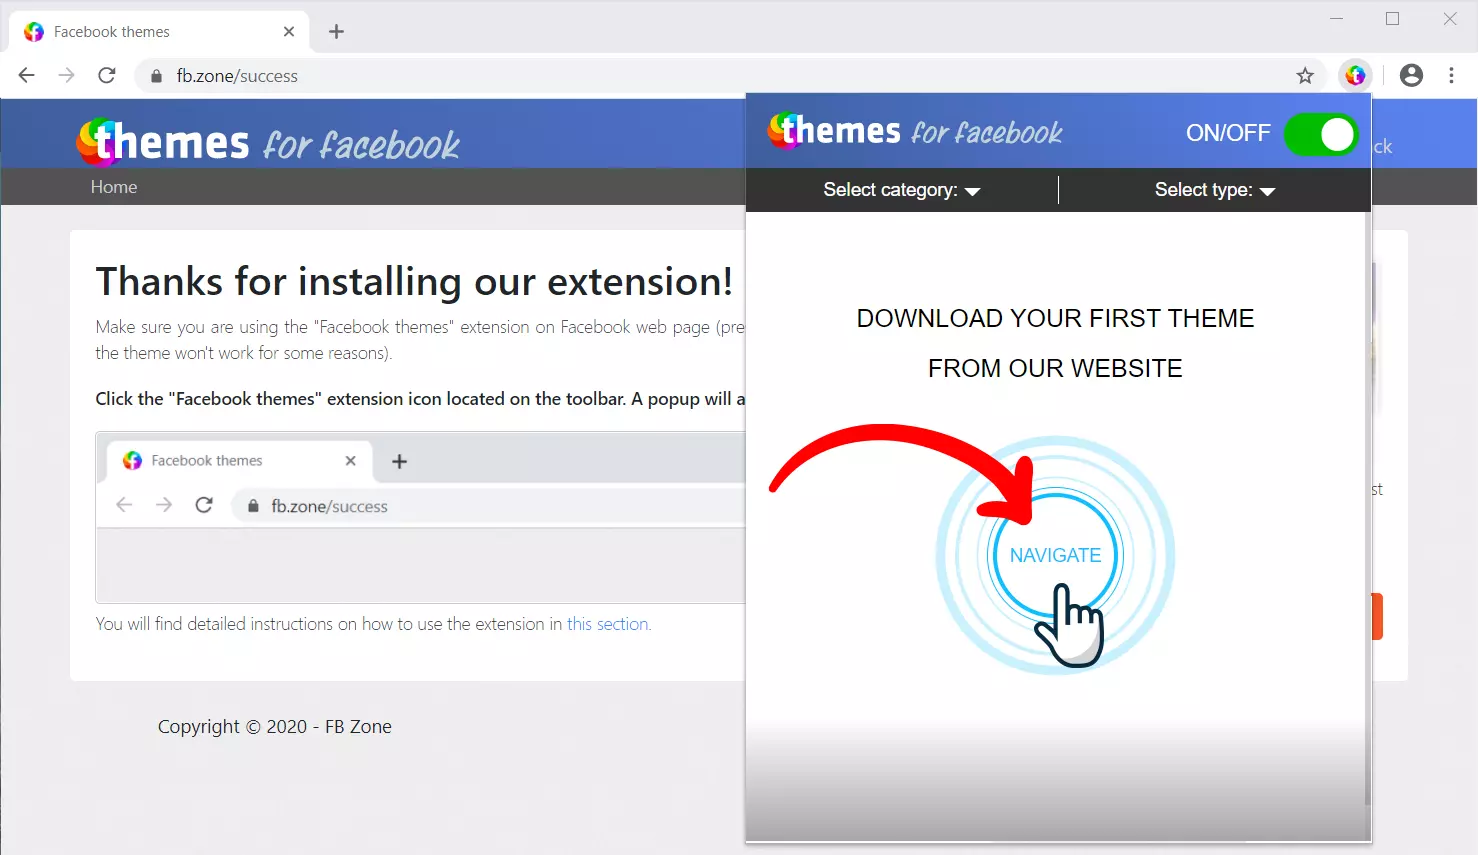 Themes for Facebook extension menu